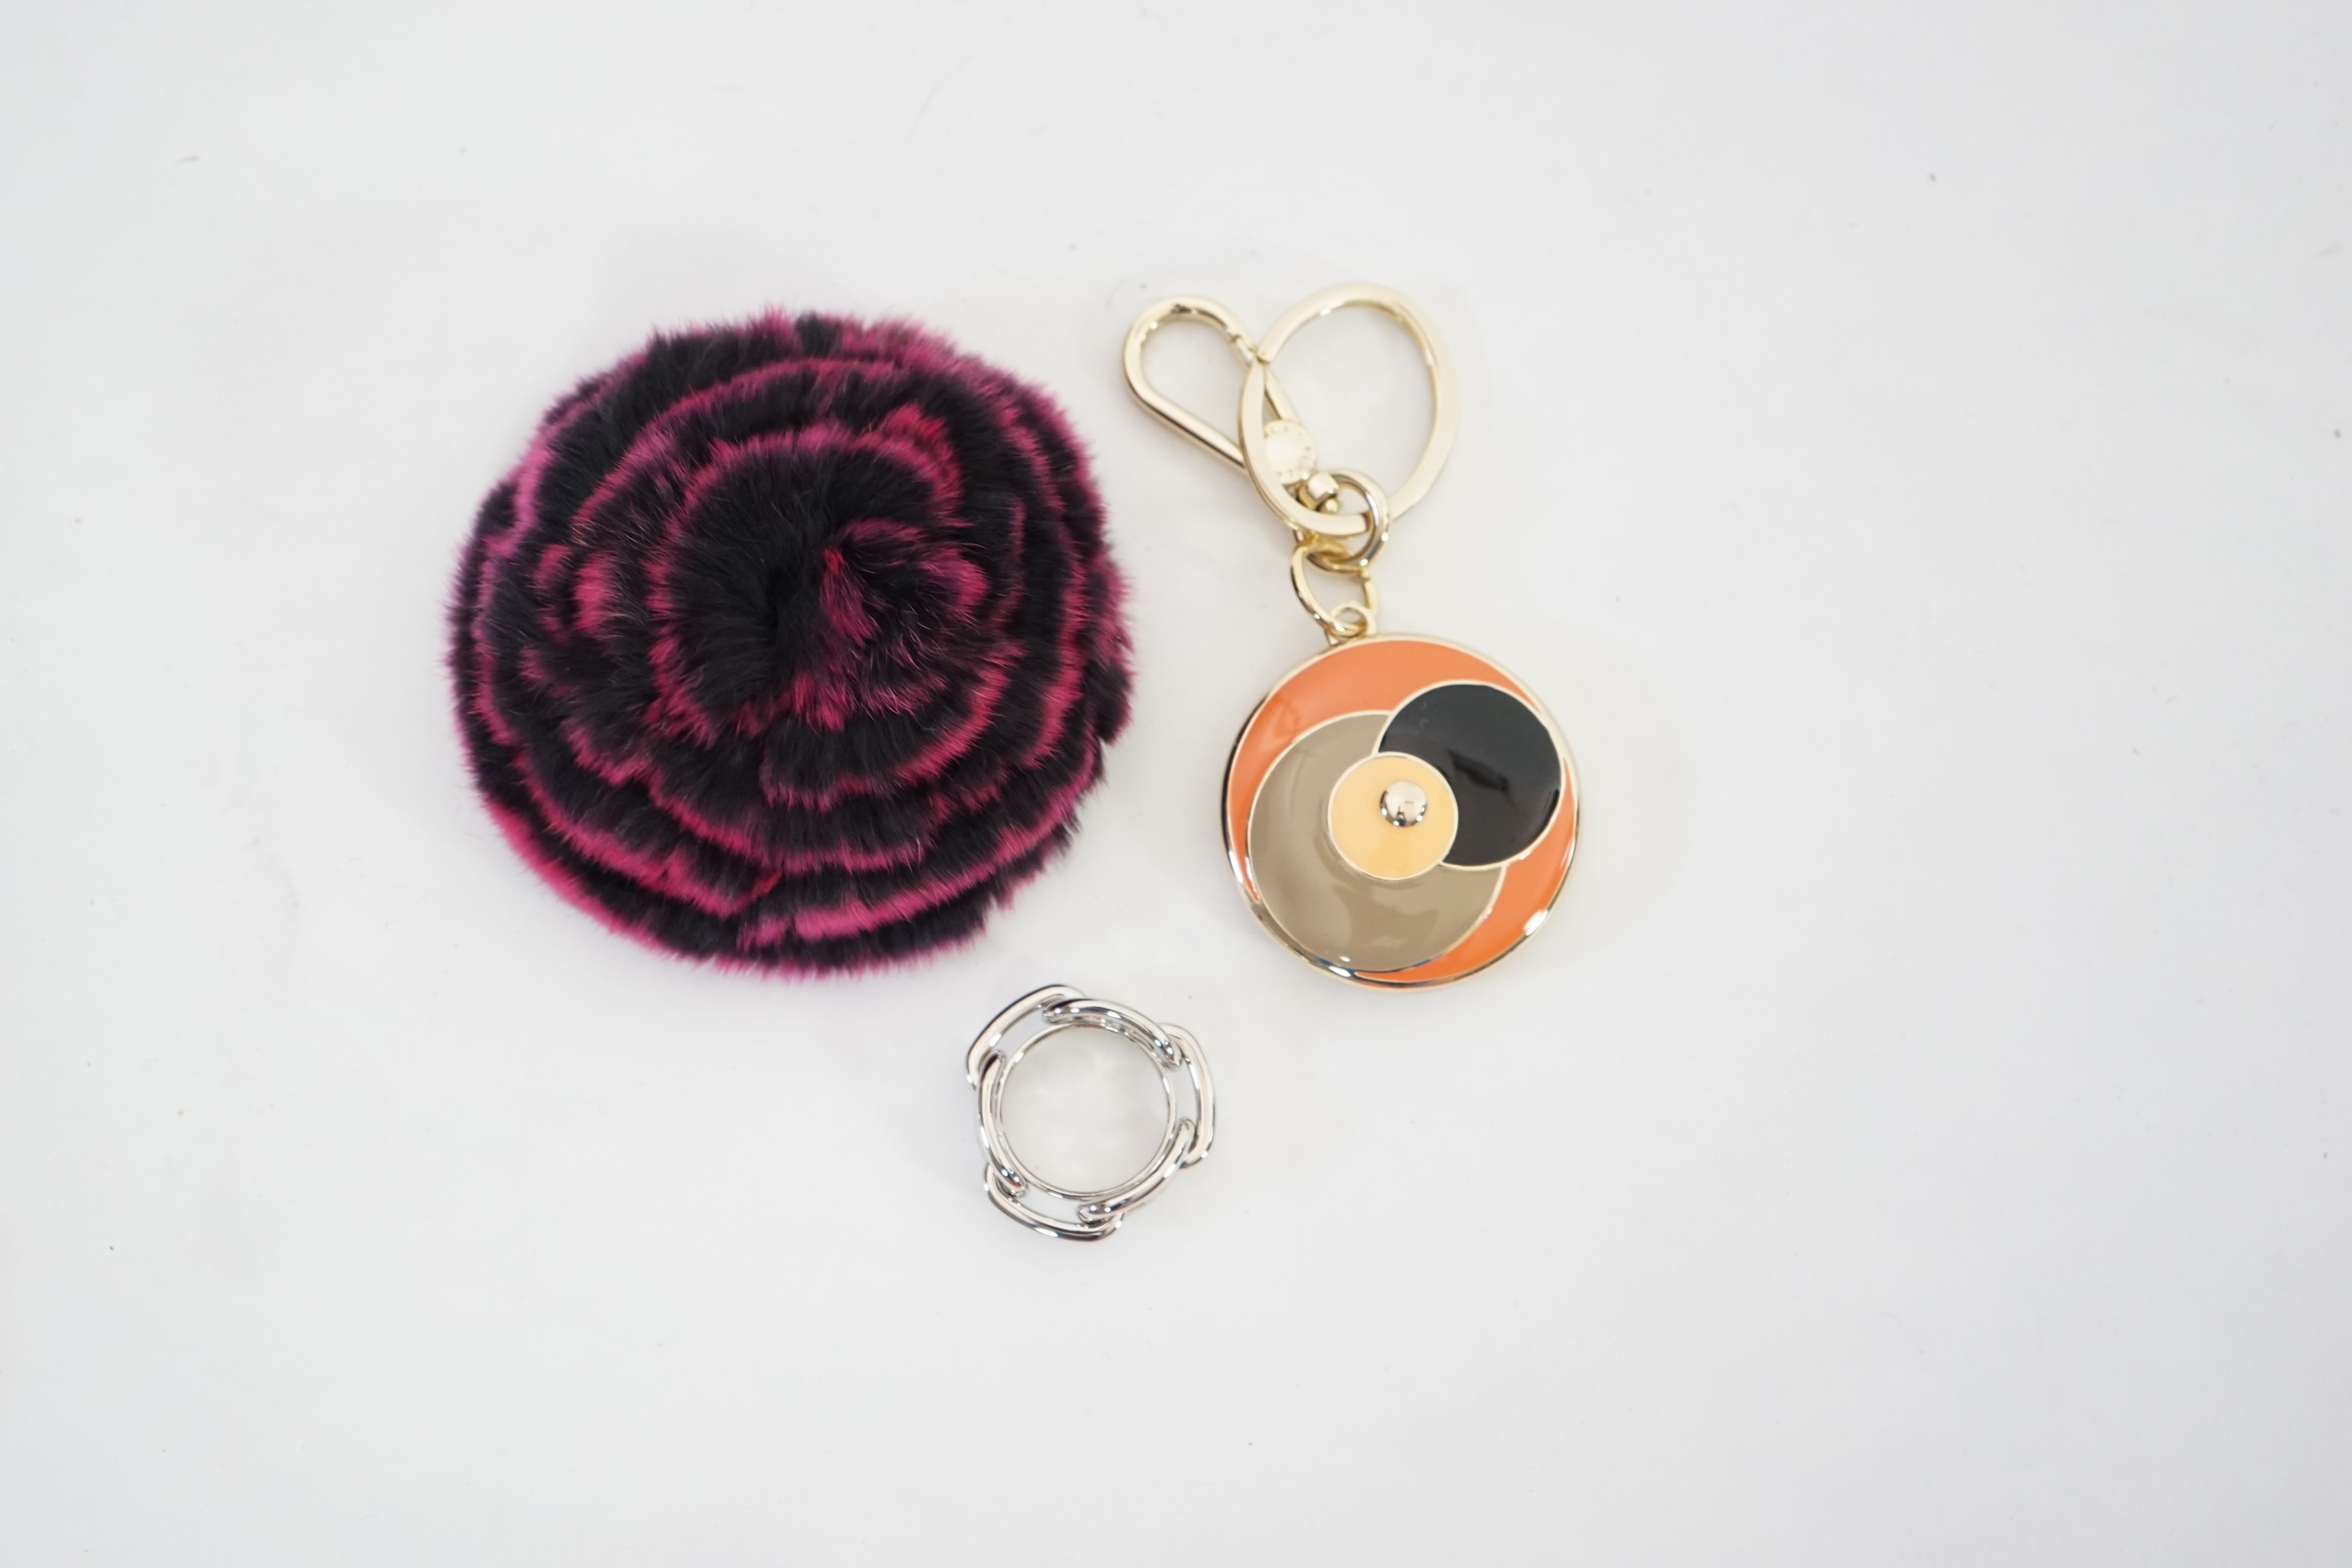 A boxed Hermes scarf ring, with box and bag and a Furla key ring and fur brooch.